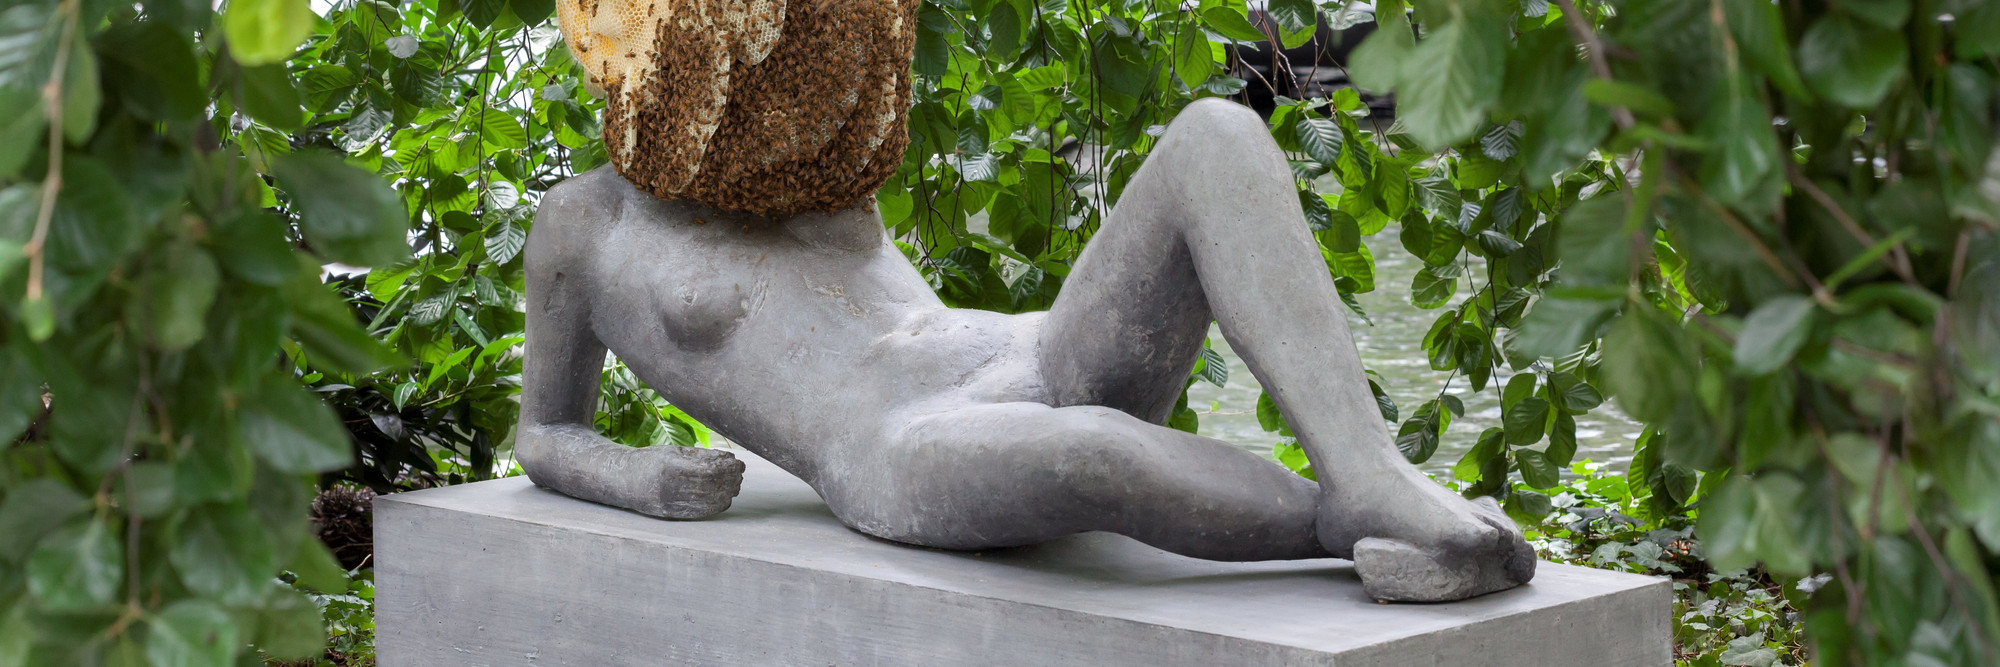 Pierre Huyghe. Untilled (Liegender Frauenakt) [Reclining female nude]. 2012. Concrete with beehive structure, wax, and live bee colony; figure: 29 1/2 x 57 1/16 x 17 11/16&#34; (75 x 145 x 45 cm), base: 11 13/16 x 57 1/16 x 21 5/8&#34; (30 x 145 x 55 cm), beehive dimensions variable. The Museum of Modern Art, New York. Purchase. © 2015 Pierre Huyghe